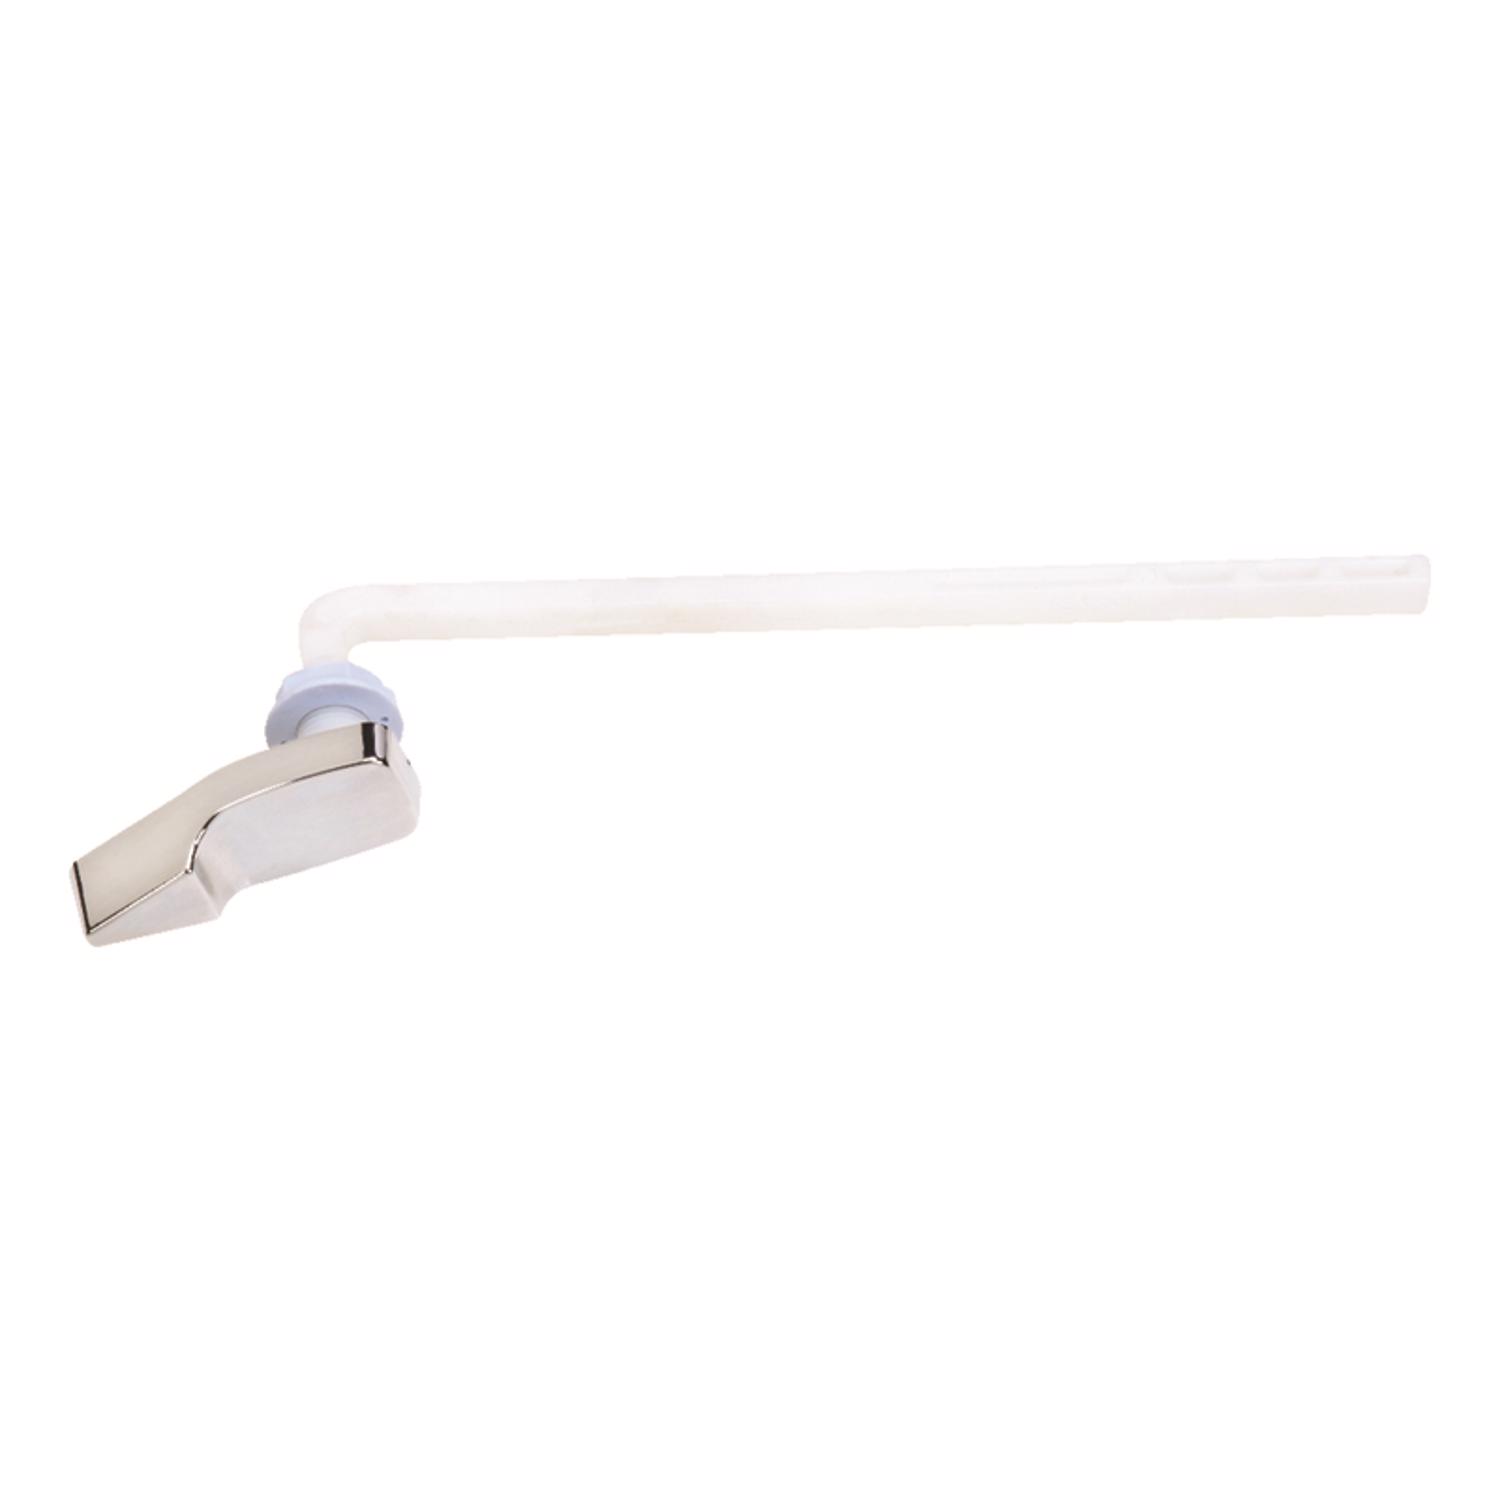 Ace Flush Lever Chrome Plated Plastic For Mansfield